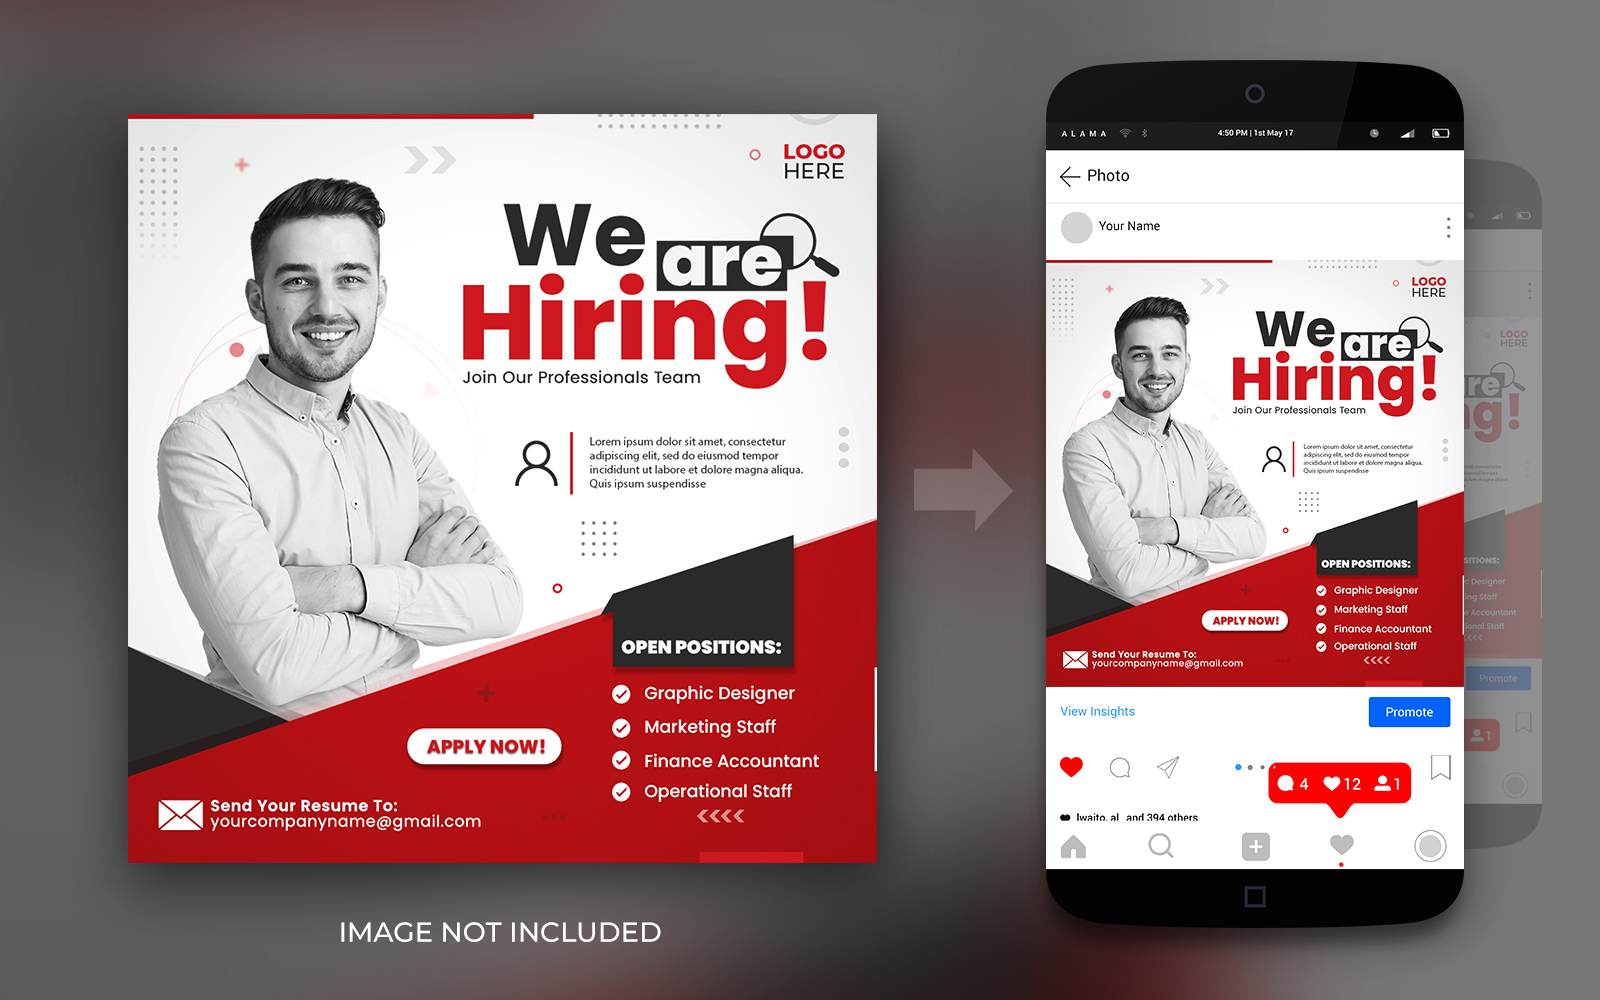 We Are Hiring Job Vacancy Social Media Instagram And Facebook Promotion Post Flyer Design Template